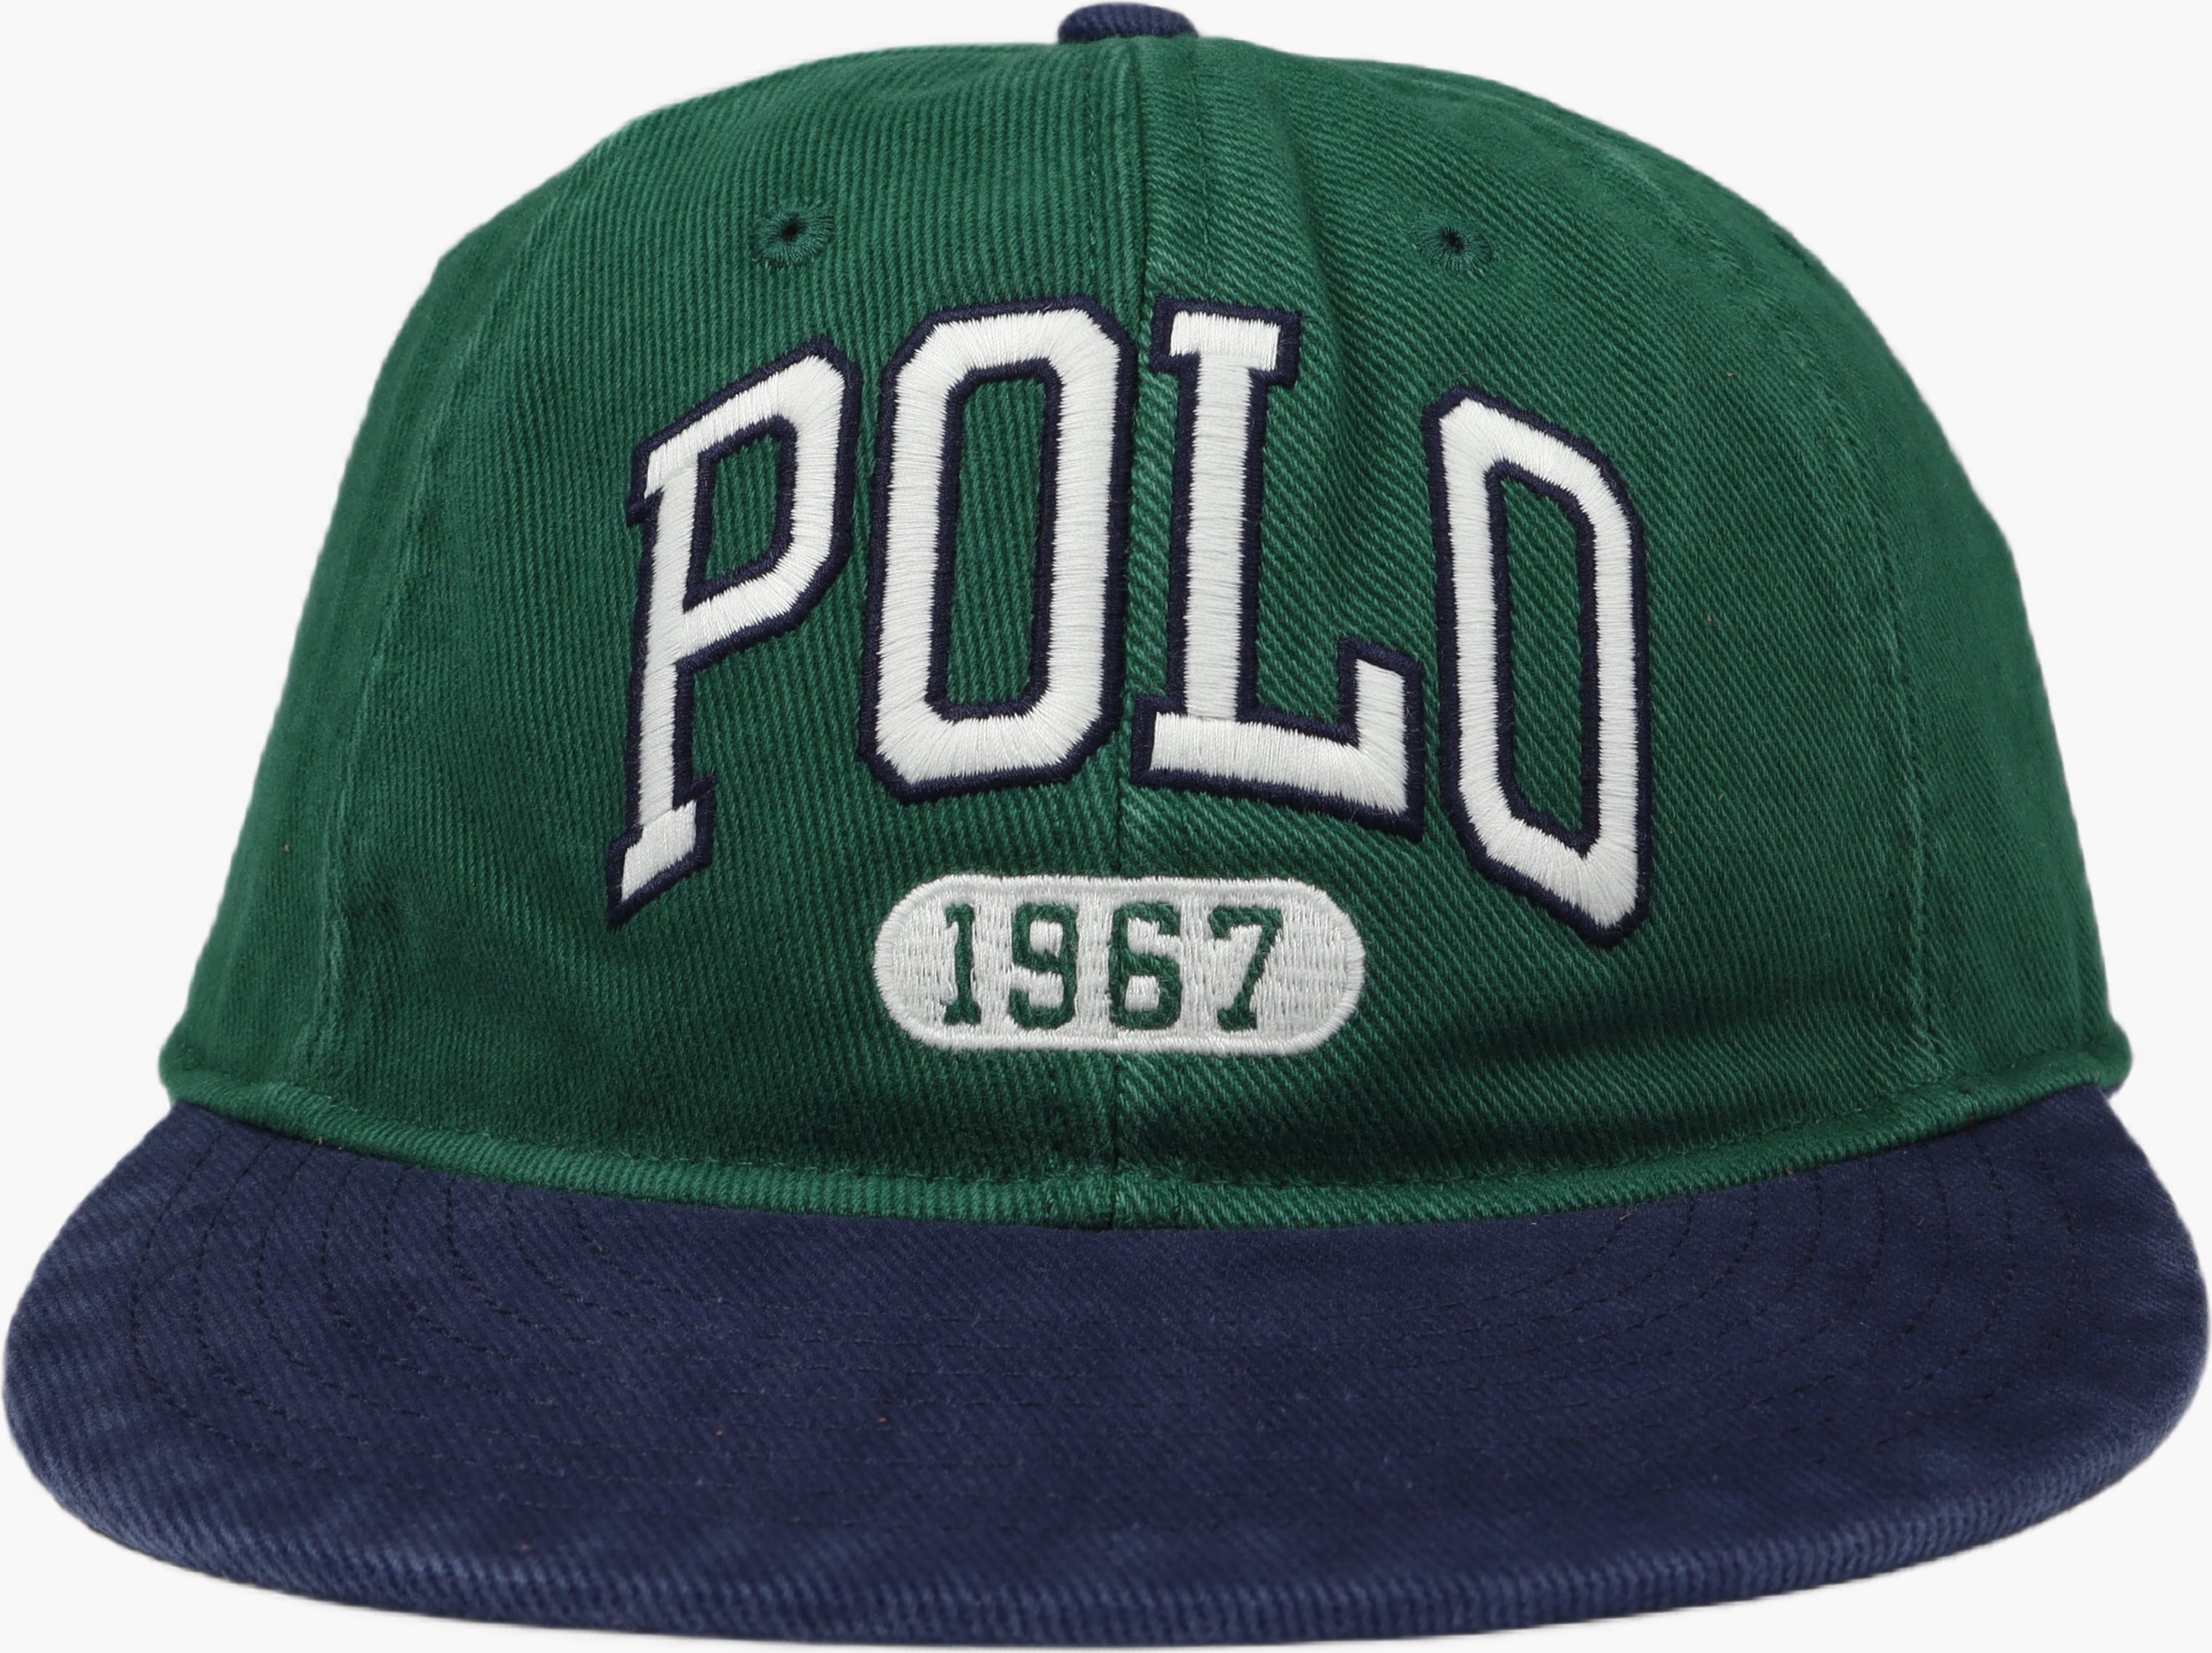 Auth Bball H-cap-hat New Forest/newport Navy